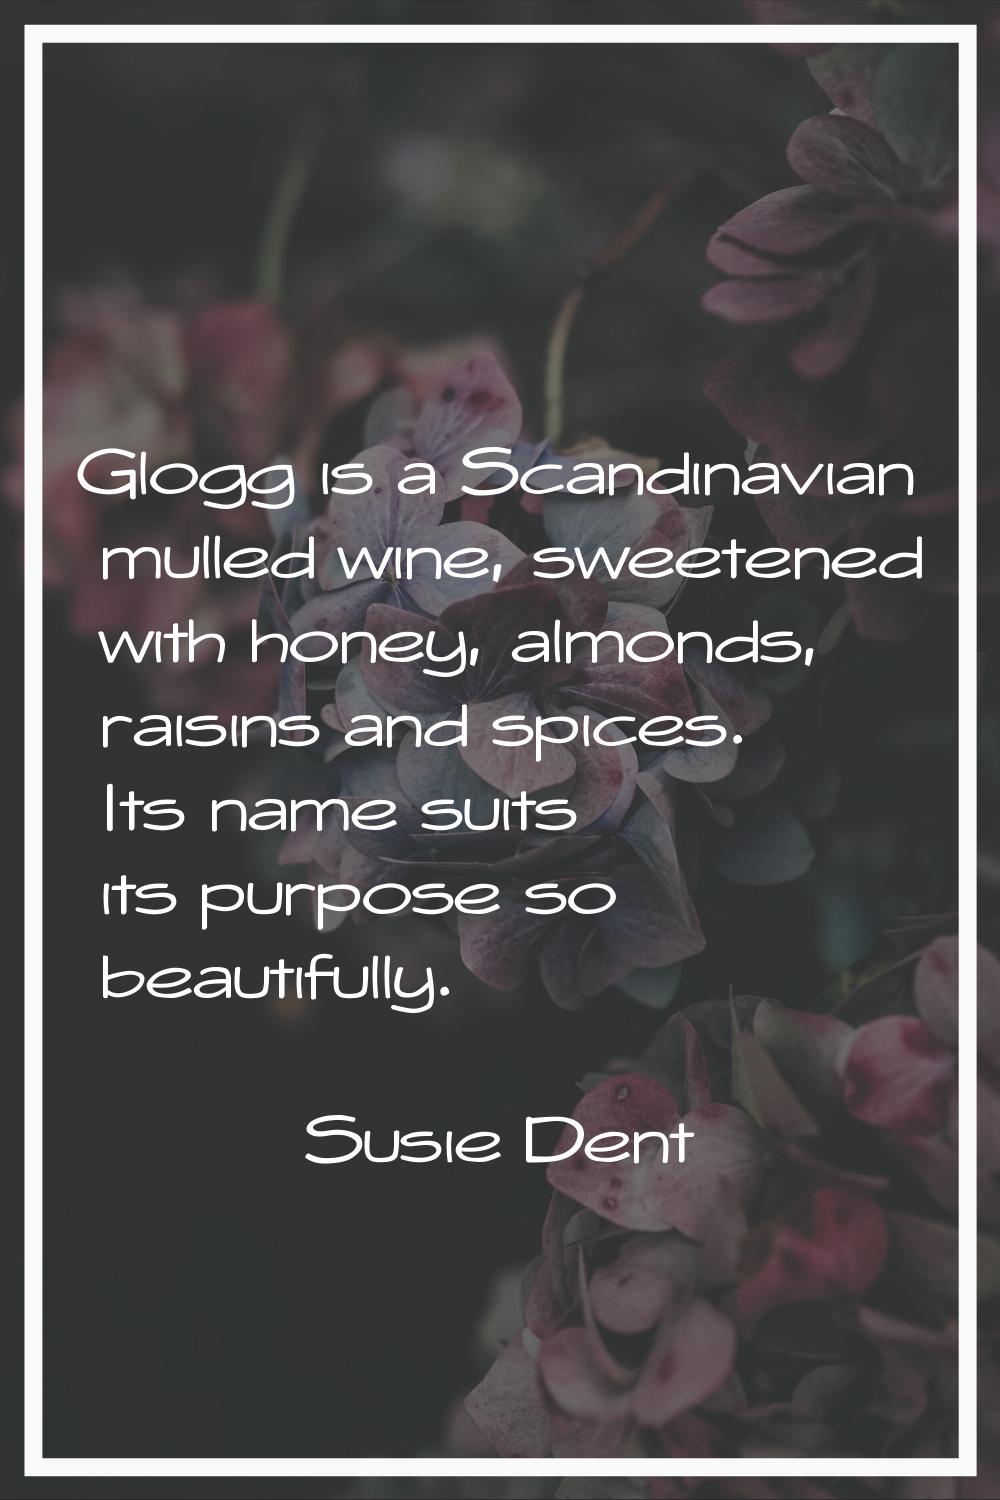 Glogg is a Scandinavian mulled wine, sweetened with honey, almonds, raisins and spices. Its name su